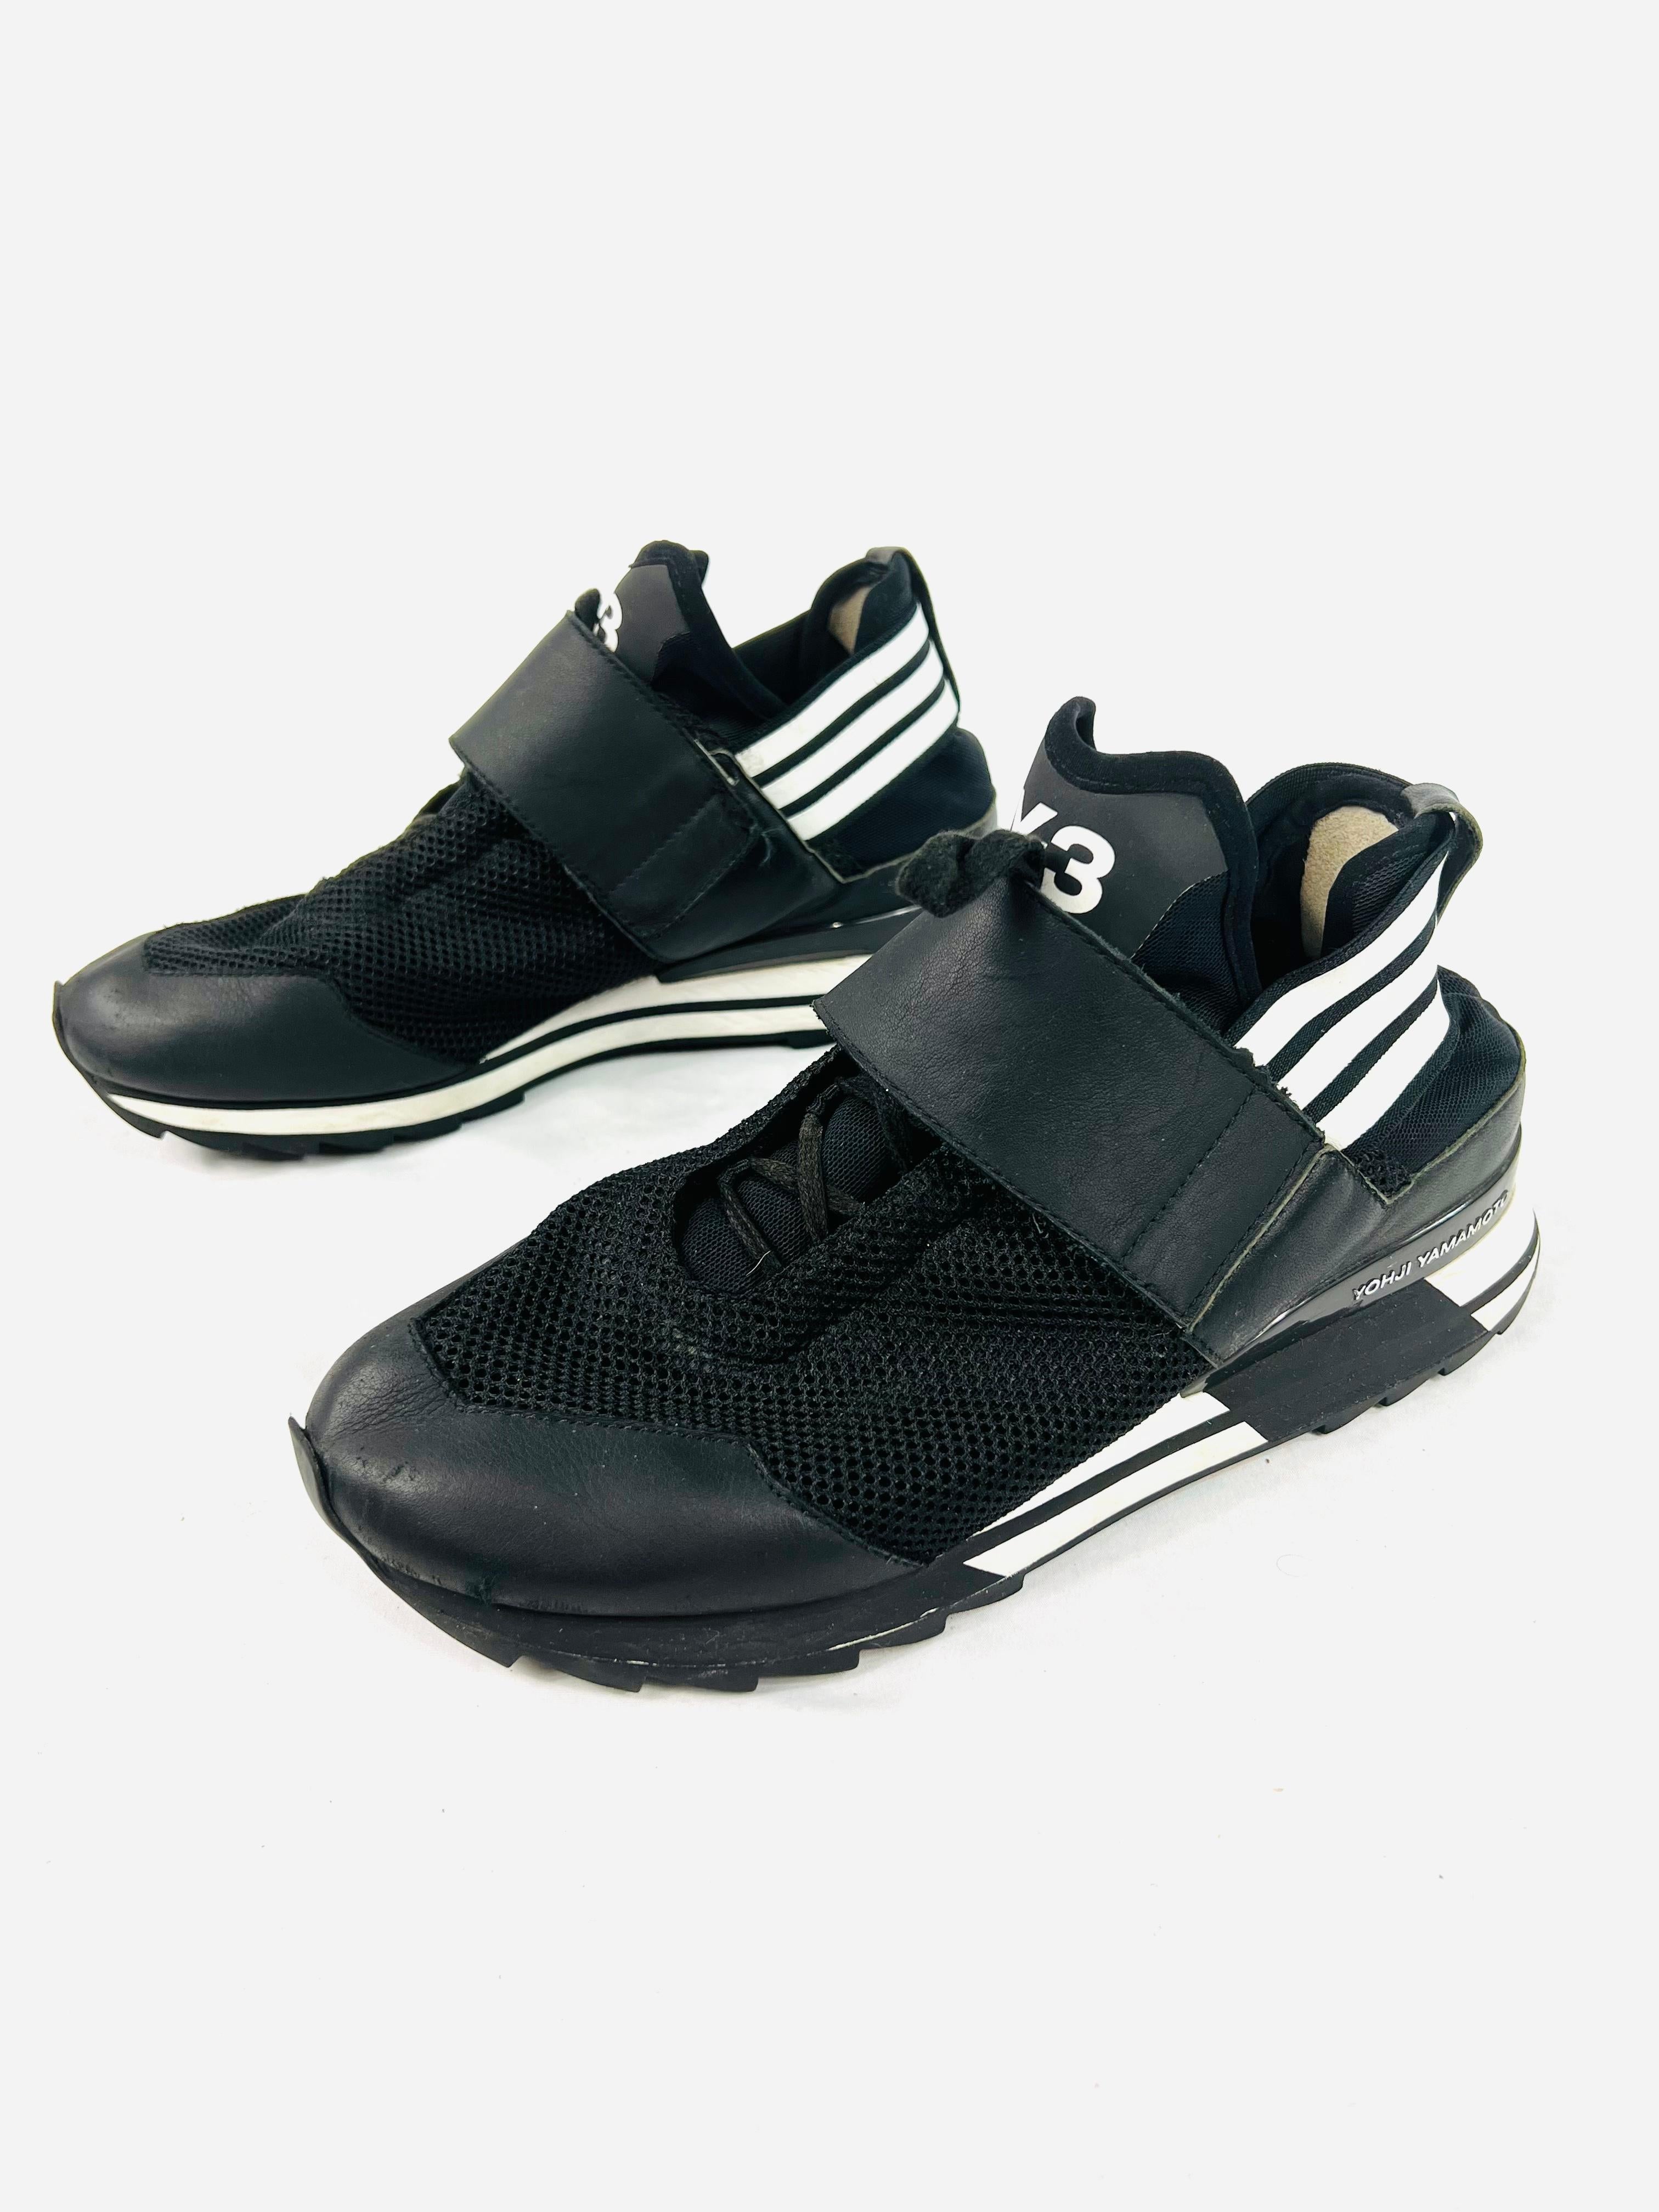 Product details:

The athletic shoes feature black leather and textile, lace fastening and black and white striped detail. 